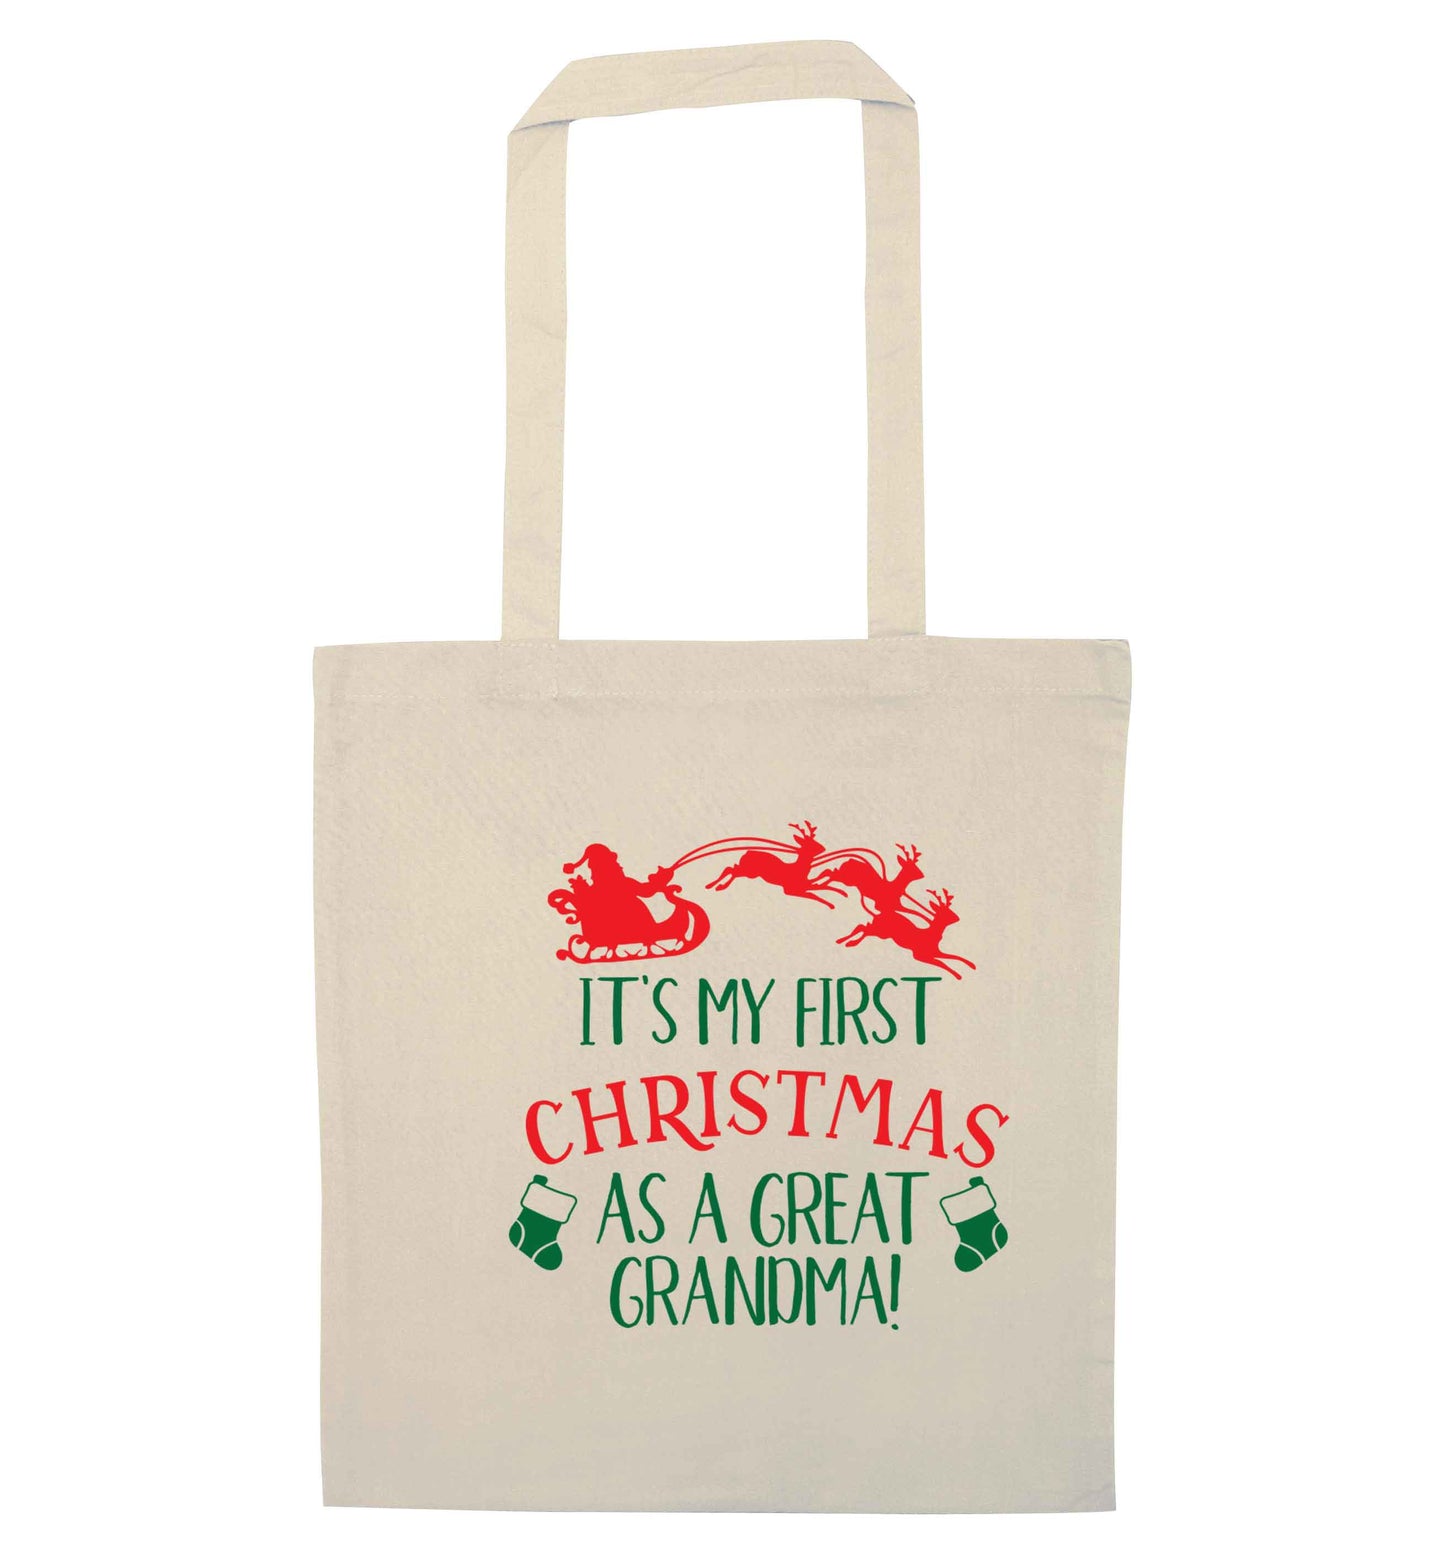 It's my first Christmas as a great grandma! natural tote bag